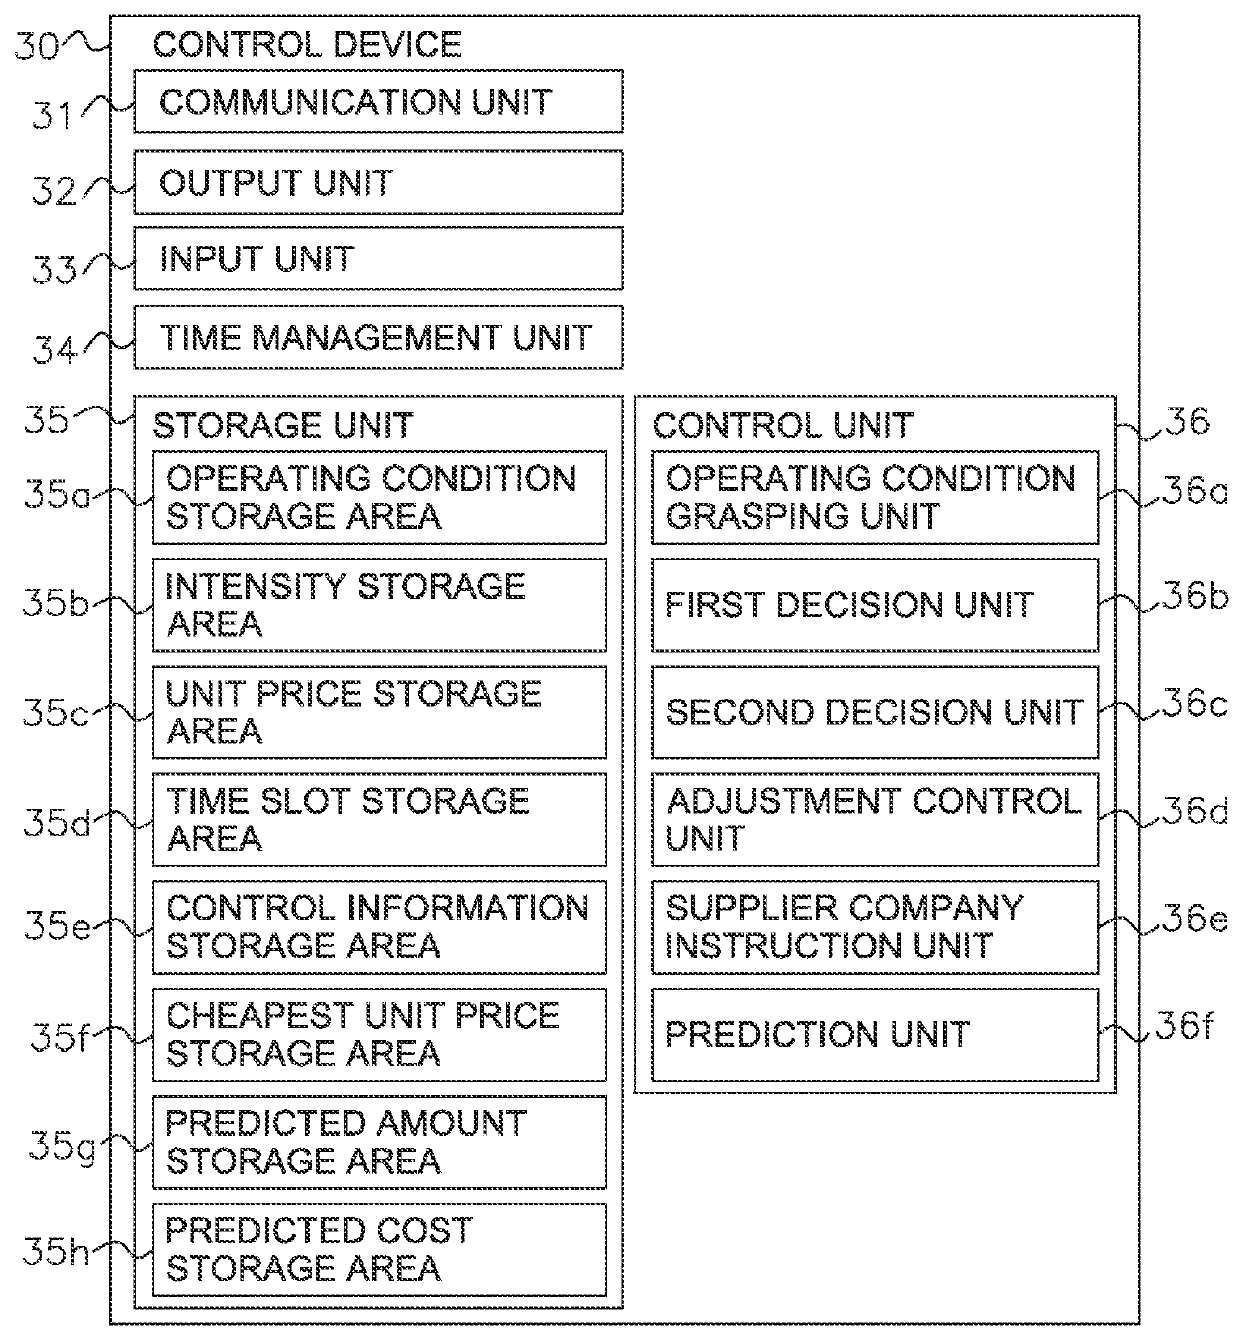 Control device for controlling facility equipment